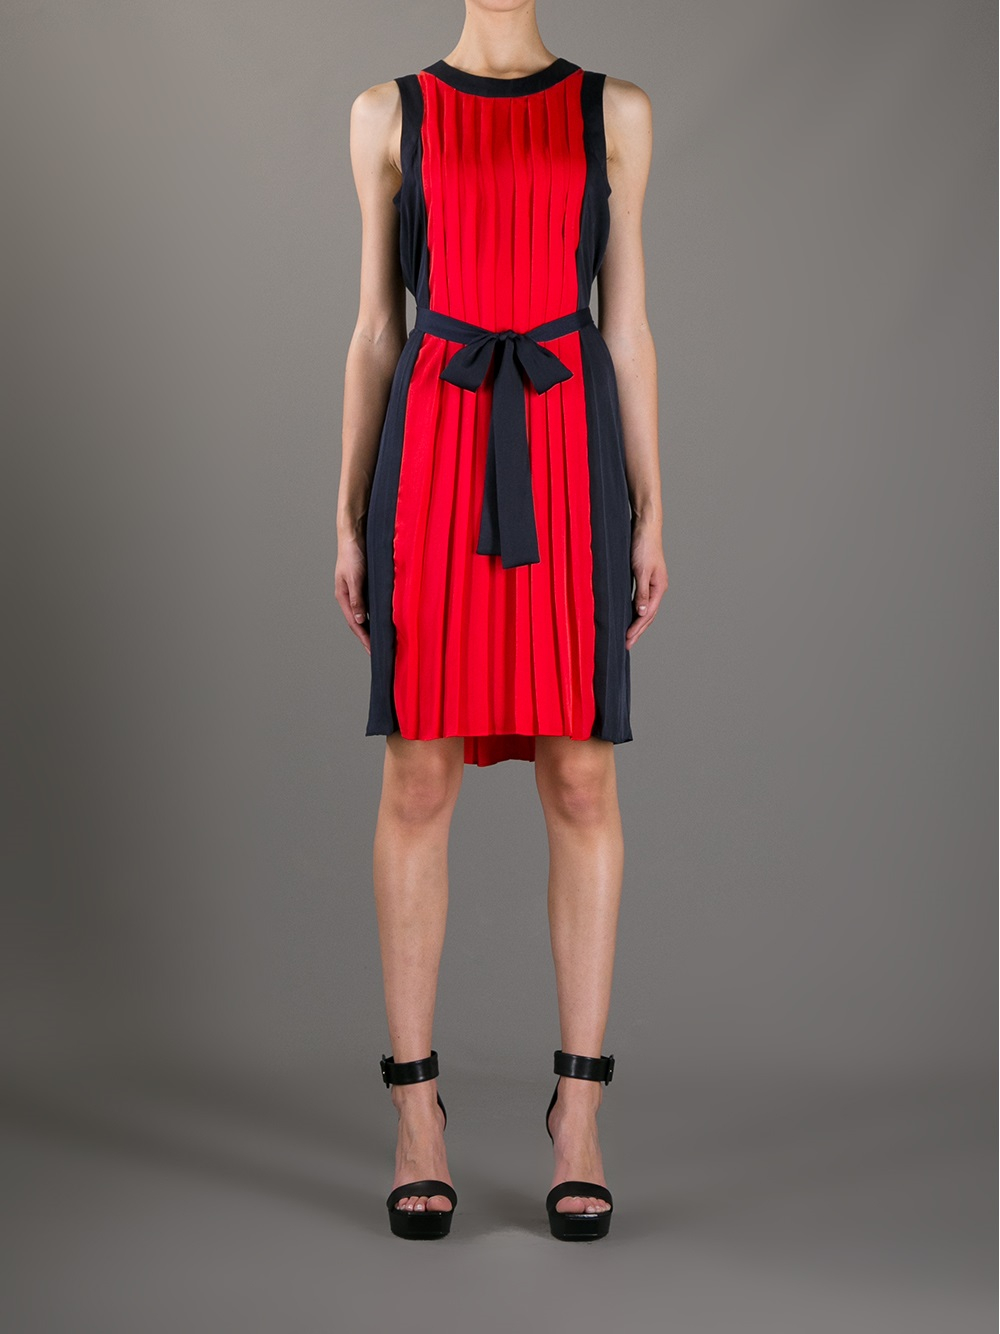 MICHAEL Michael Kors Sleeveless Pleated Dress in Red - Lyst